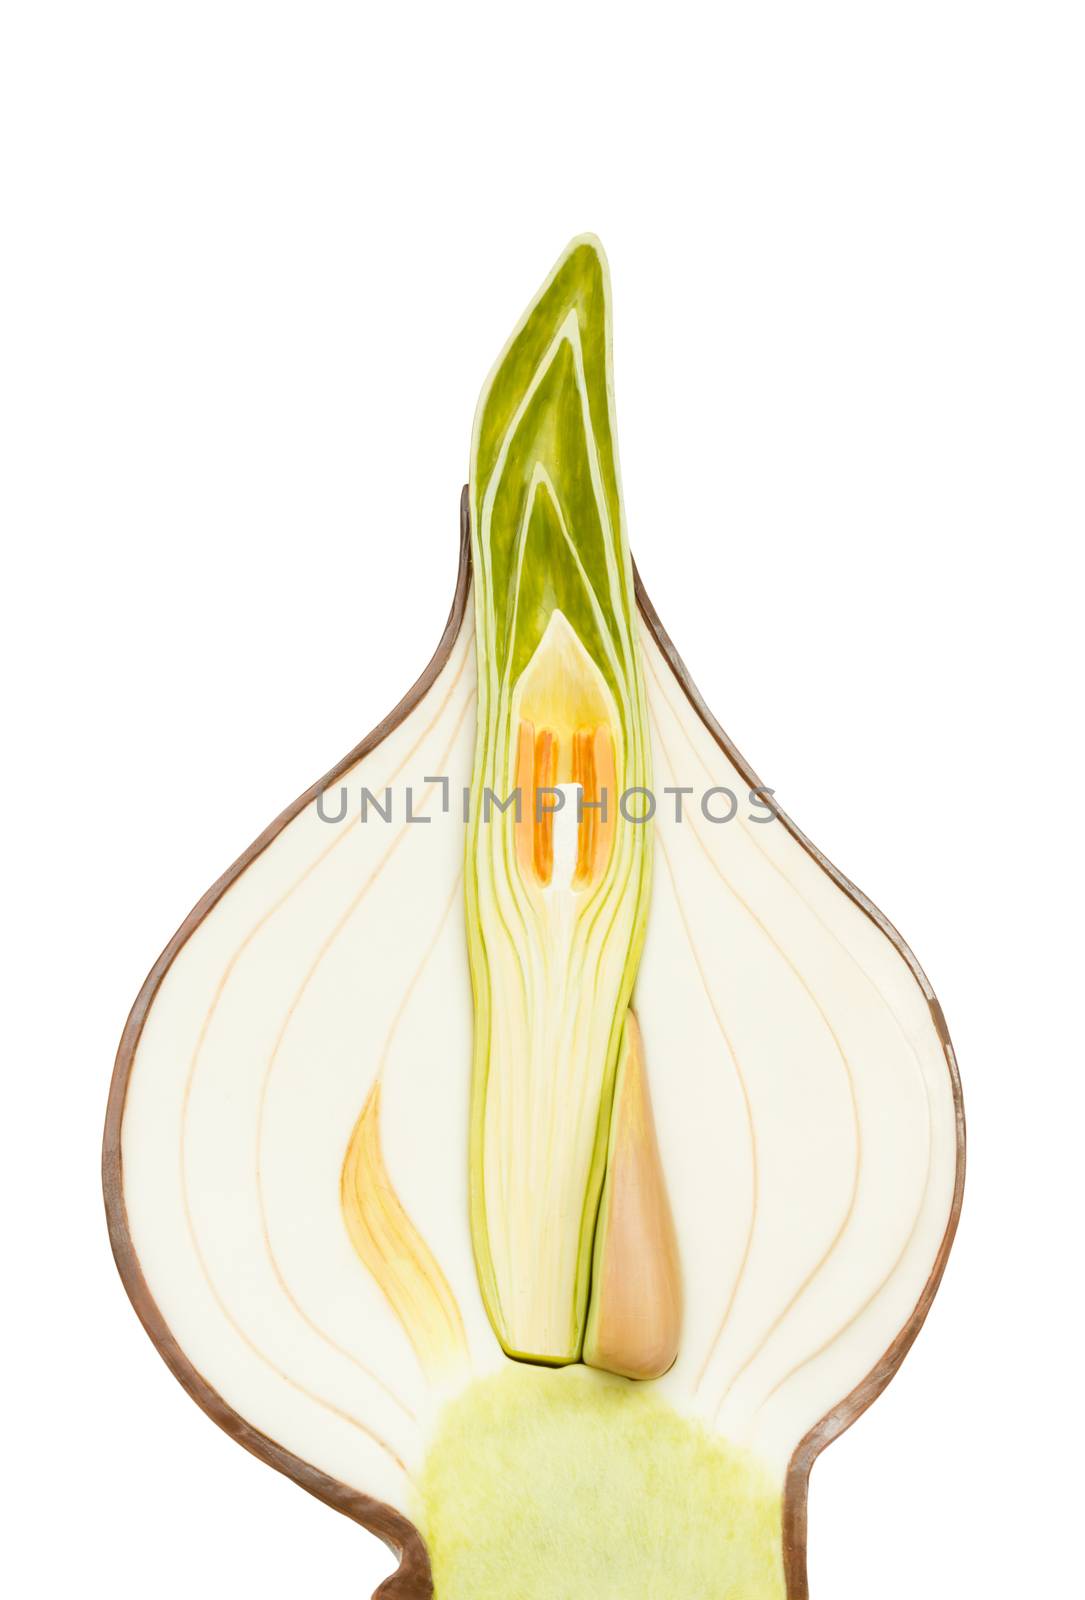 Artificial onion model for education isolated on white backgroun by BenSchonewille